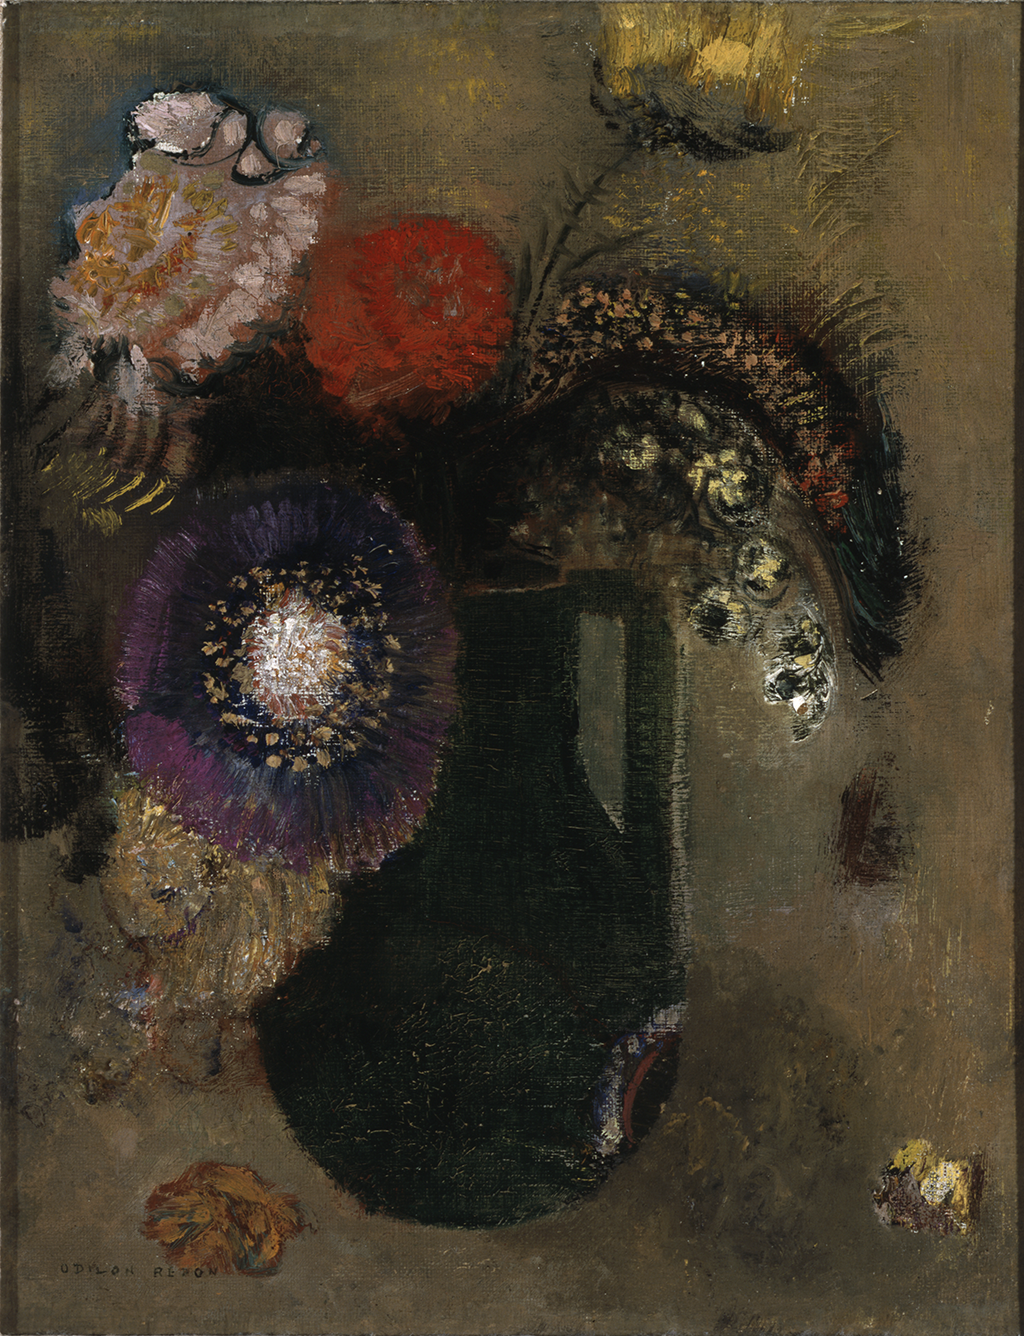 A painting depicting a variety of flowers and plants hanging out of a dark green vase. There is a large purple, red, and white flower.